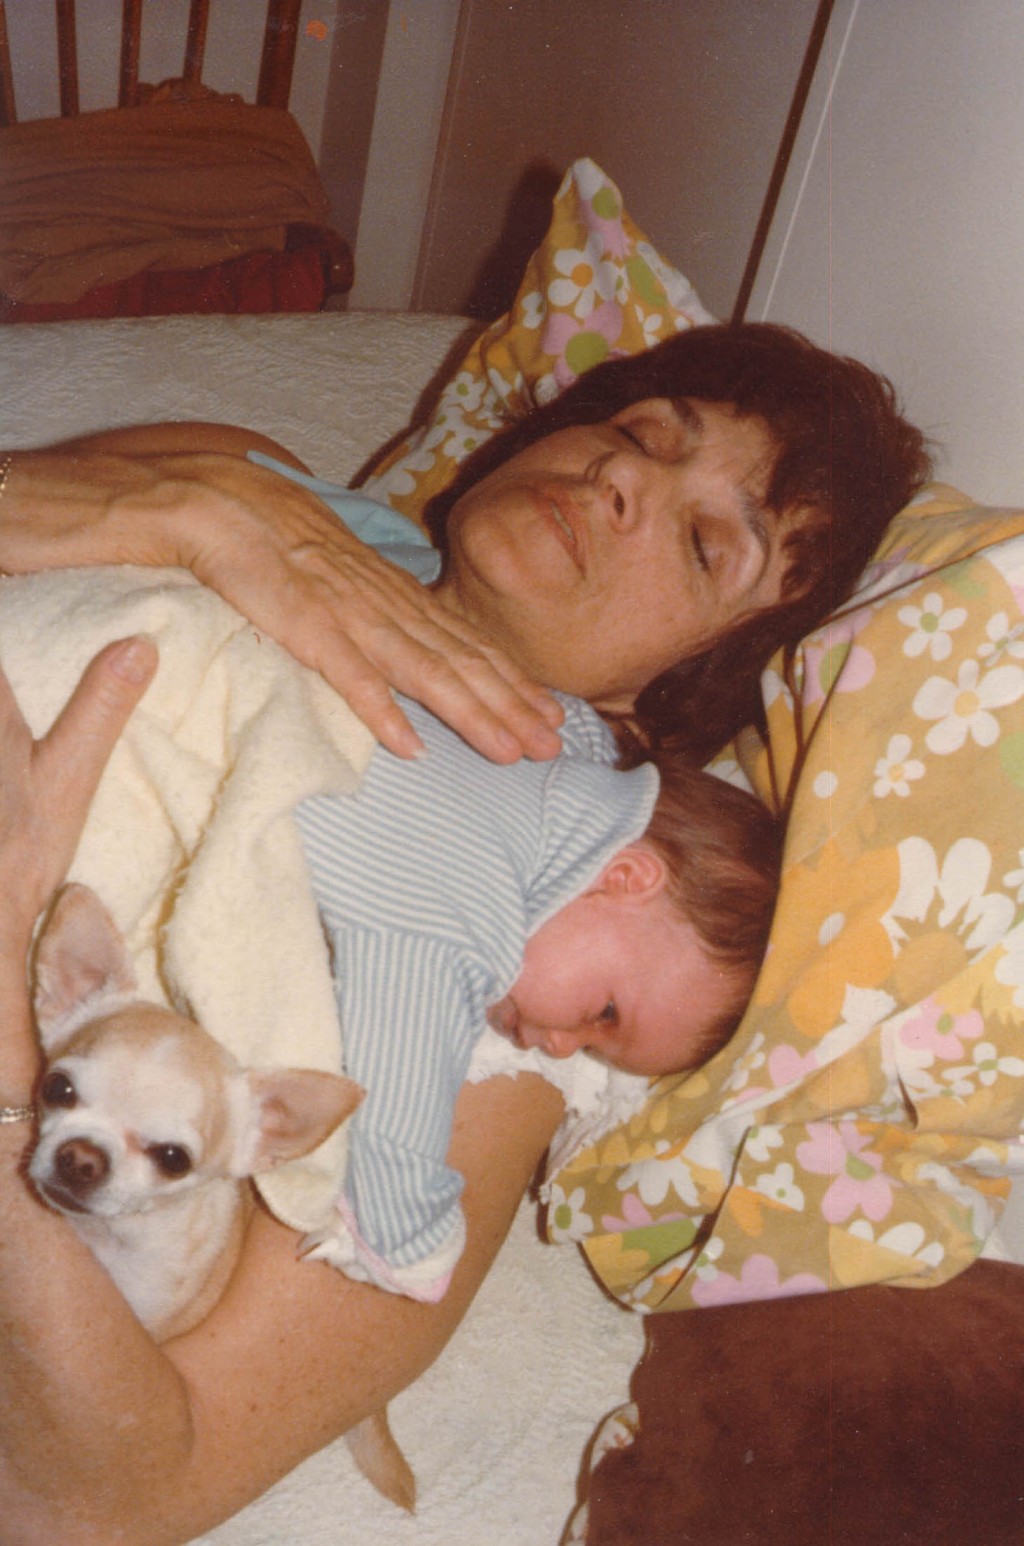 Blanka with her granddaughter, Alexis Danielle, and family dog.